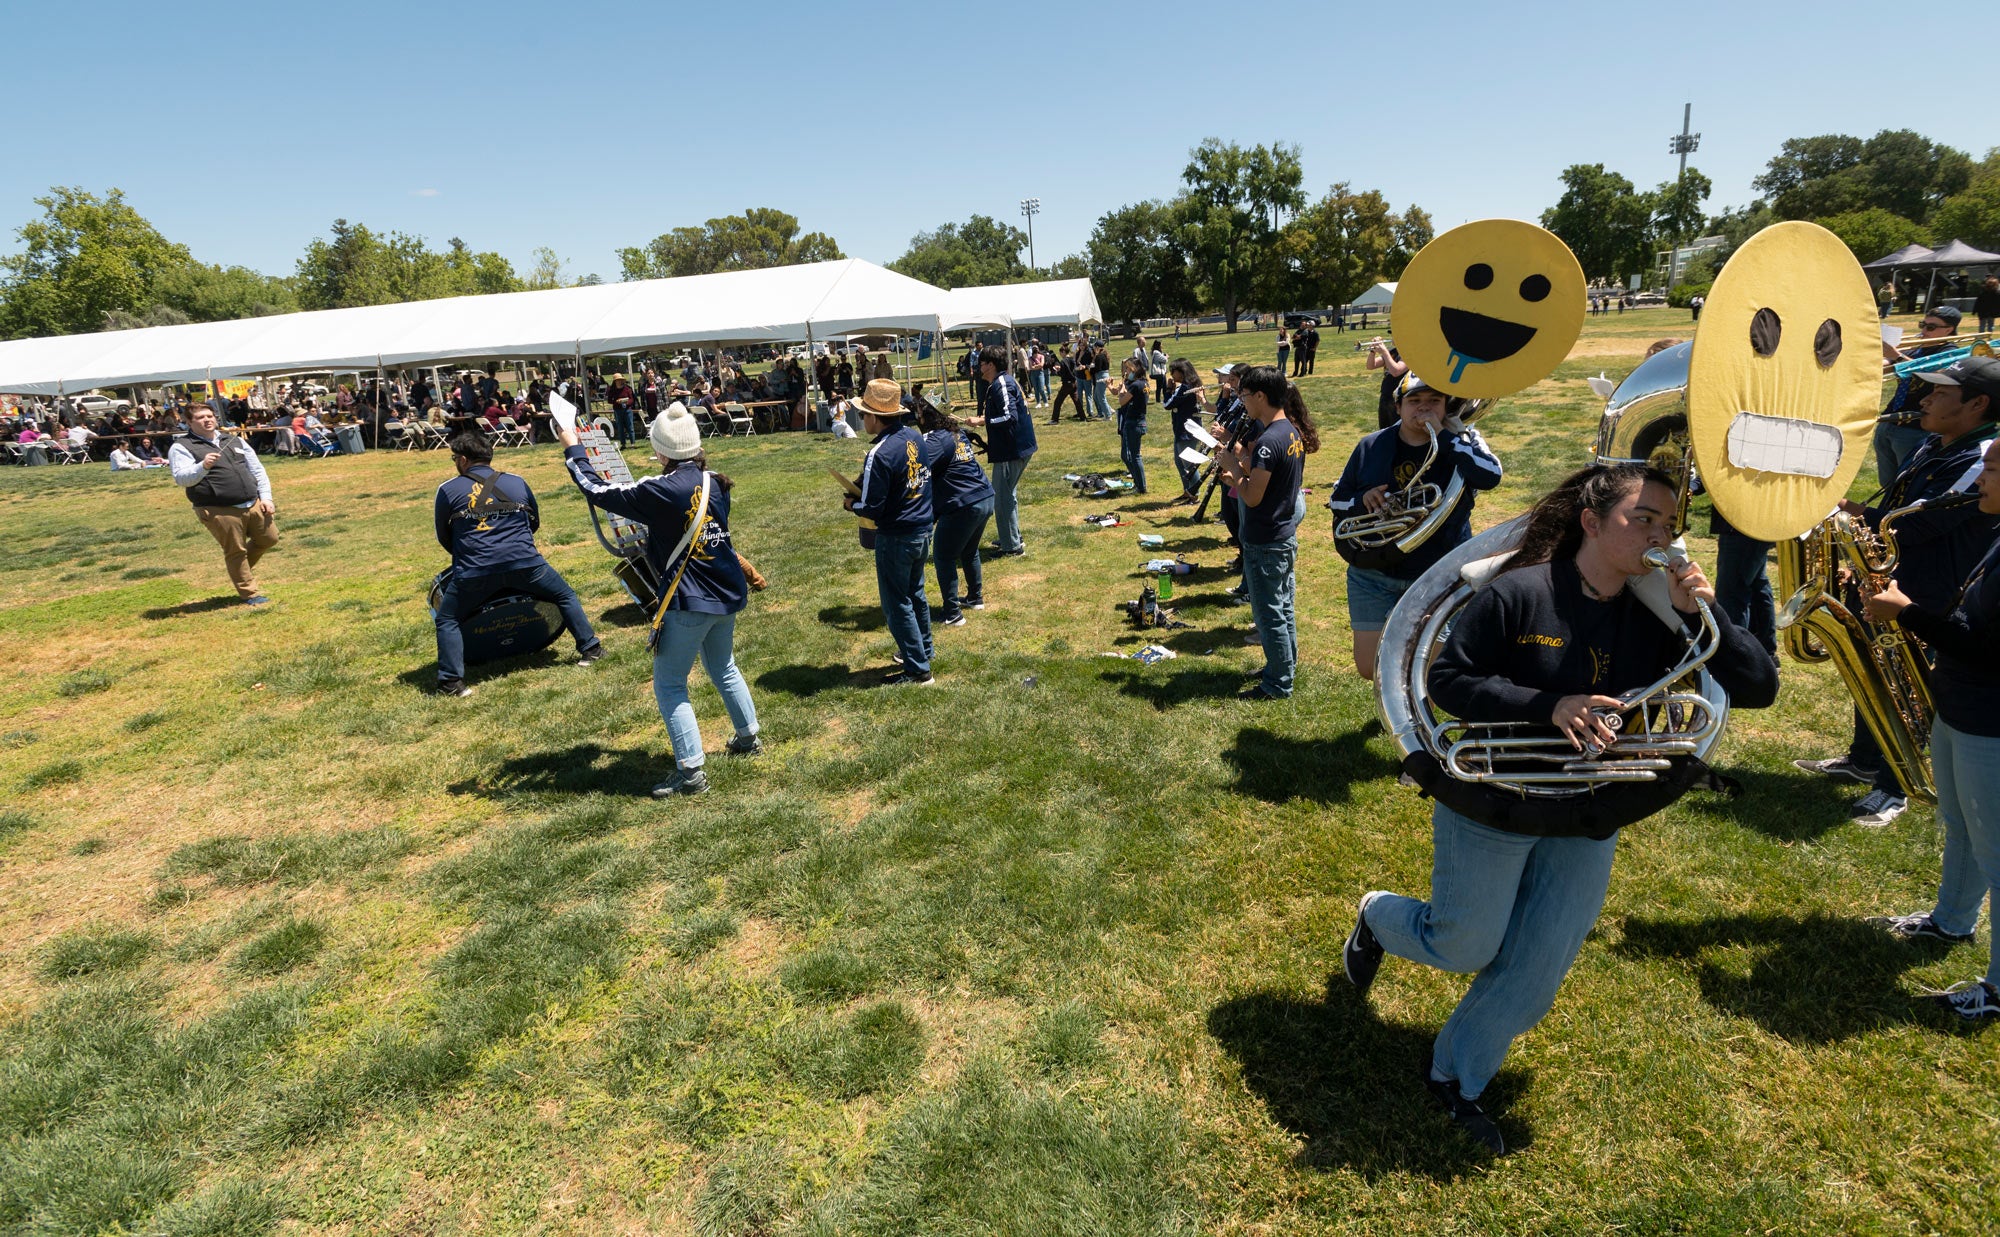 Tuba sections breaks off from UC Davis Marching Band